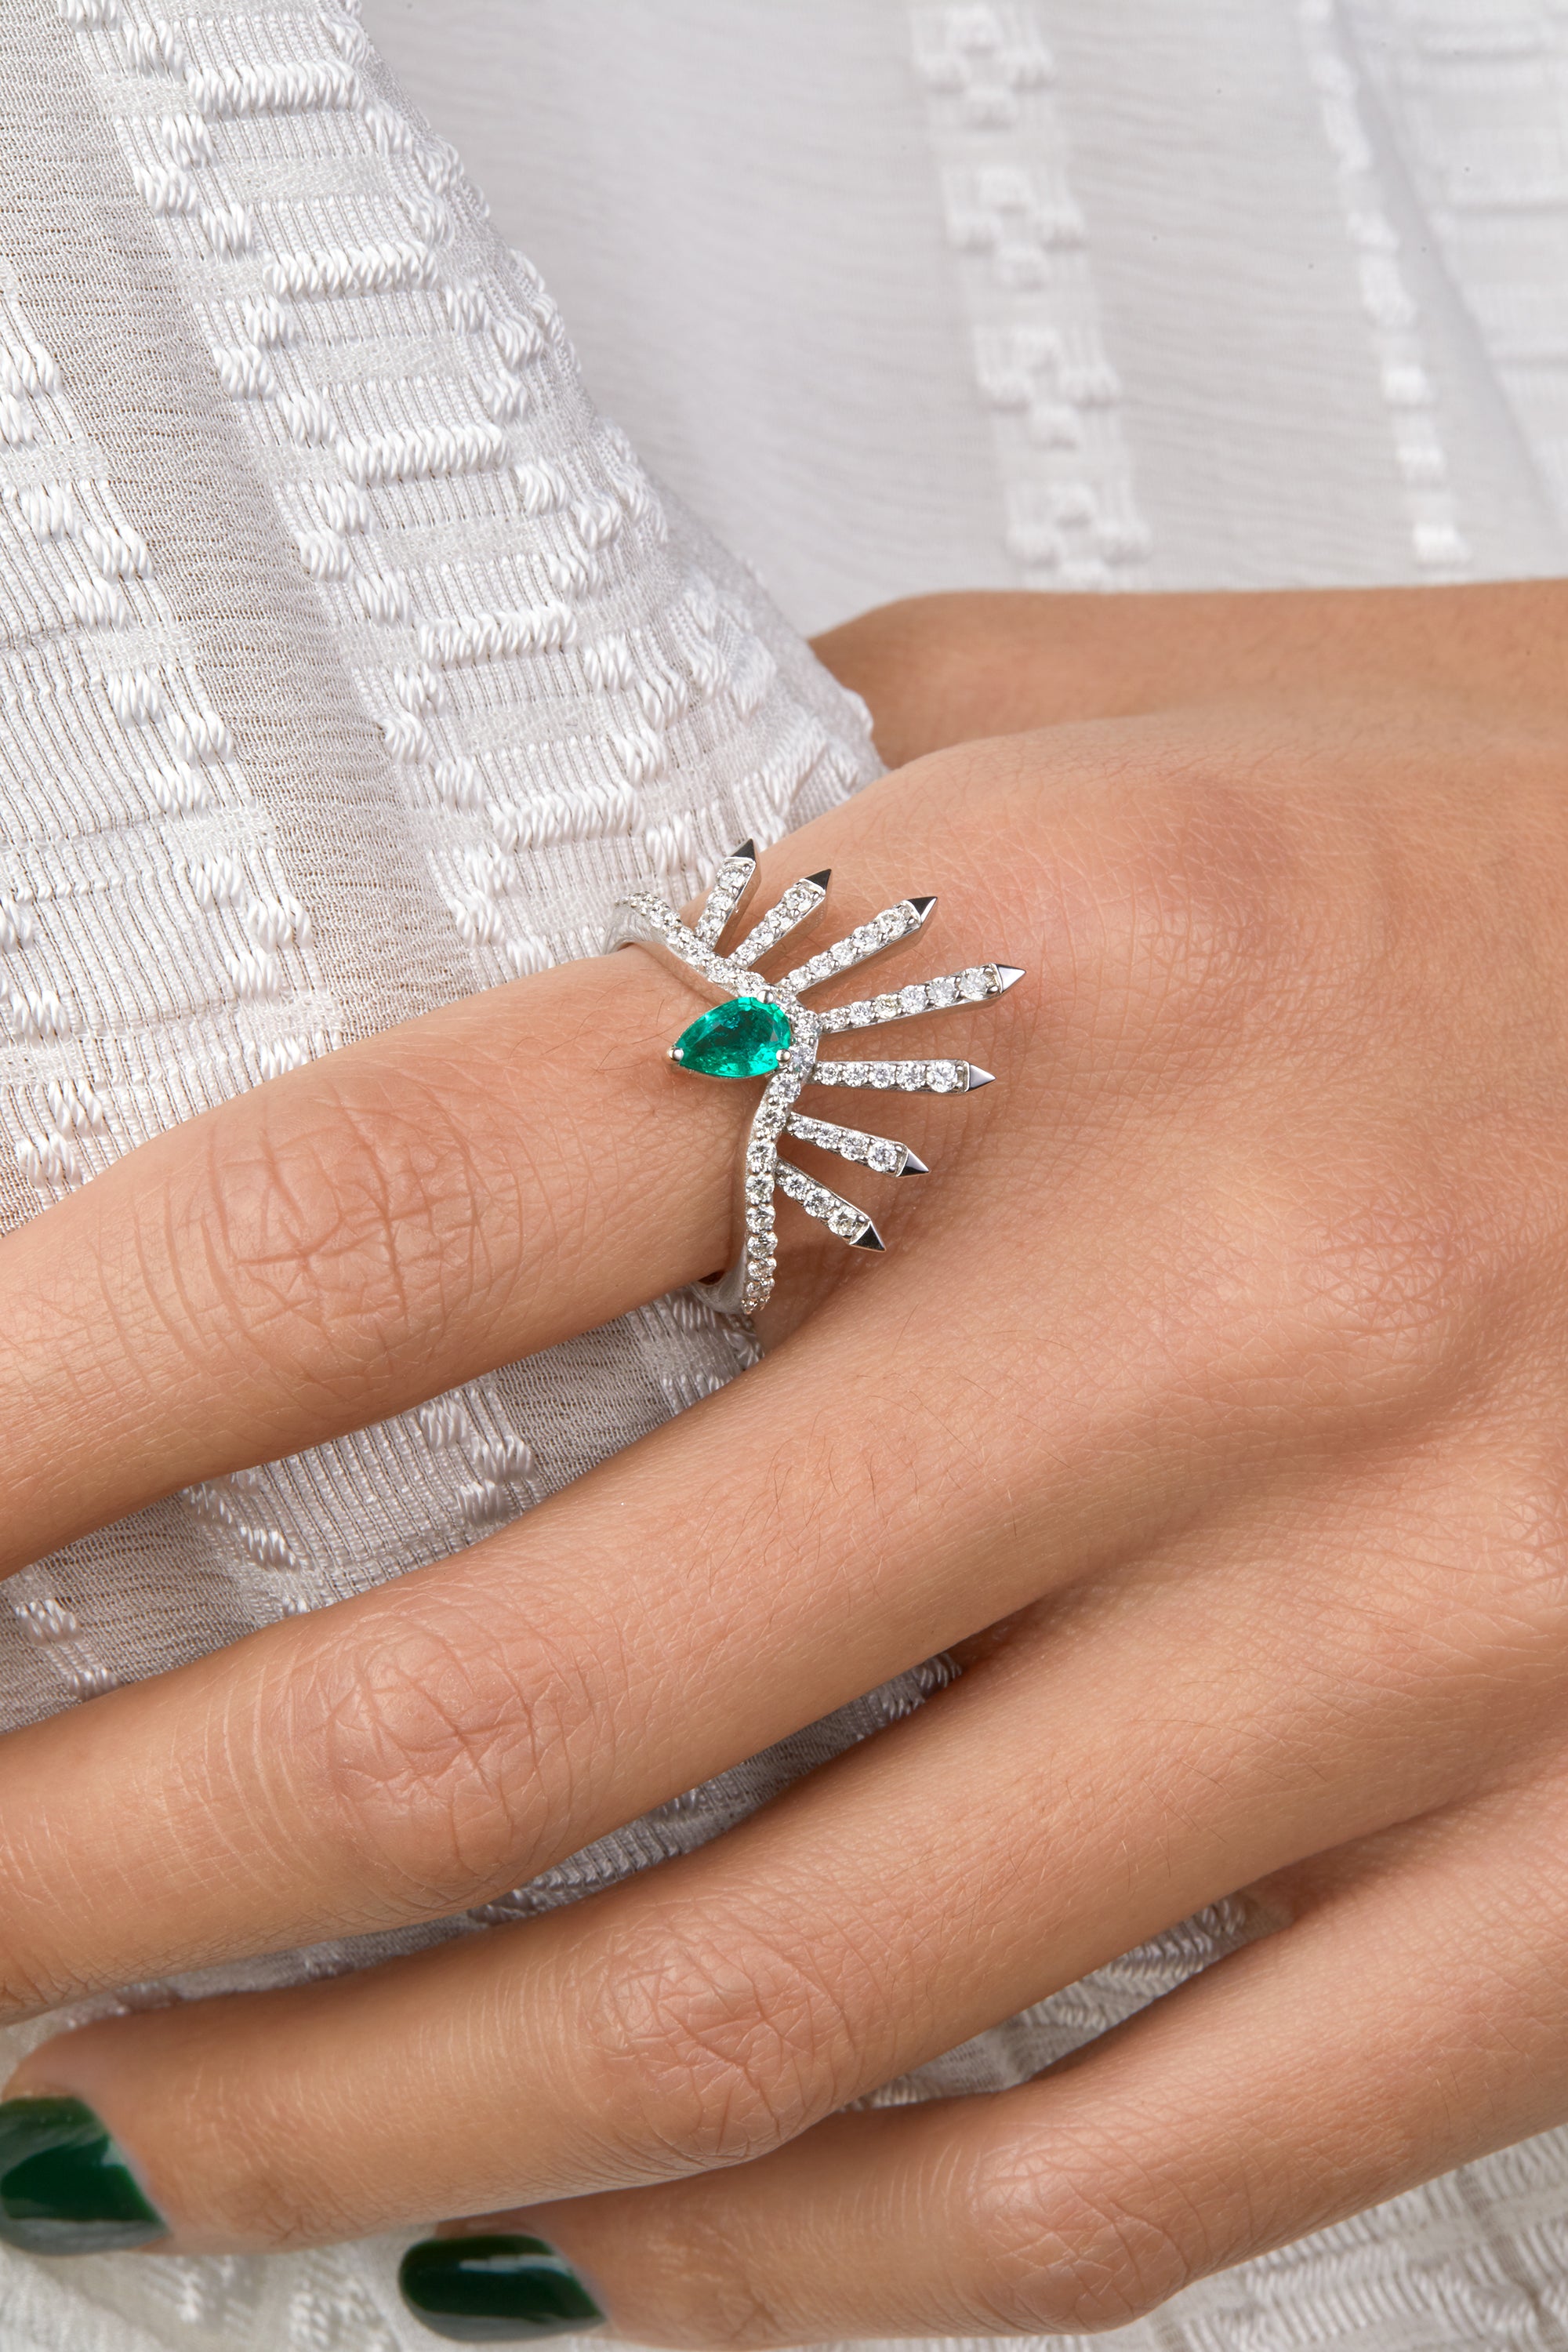 Diamond white gold ring with a pear shaped emerald portrayed facing each other on hand model wearing a denim jumpsuit.